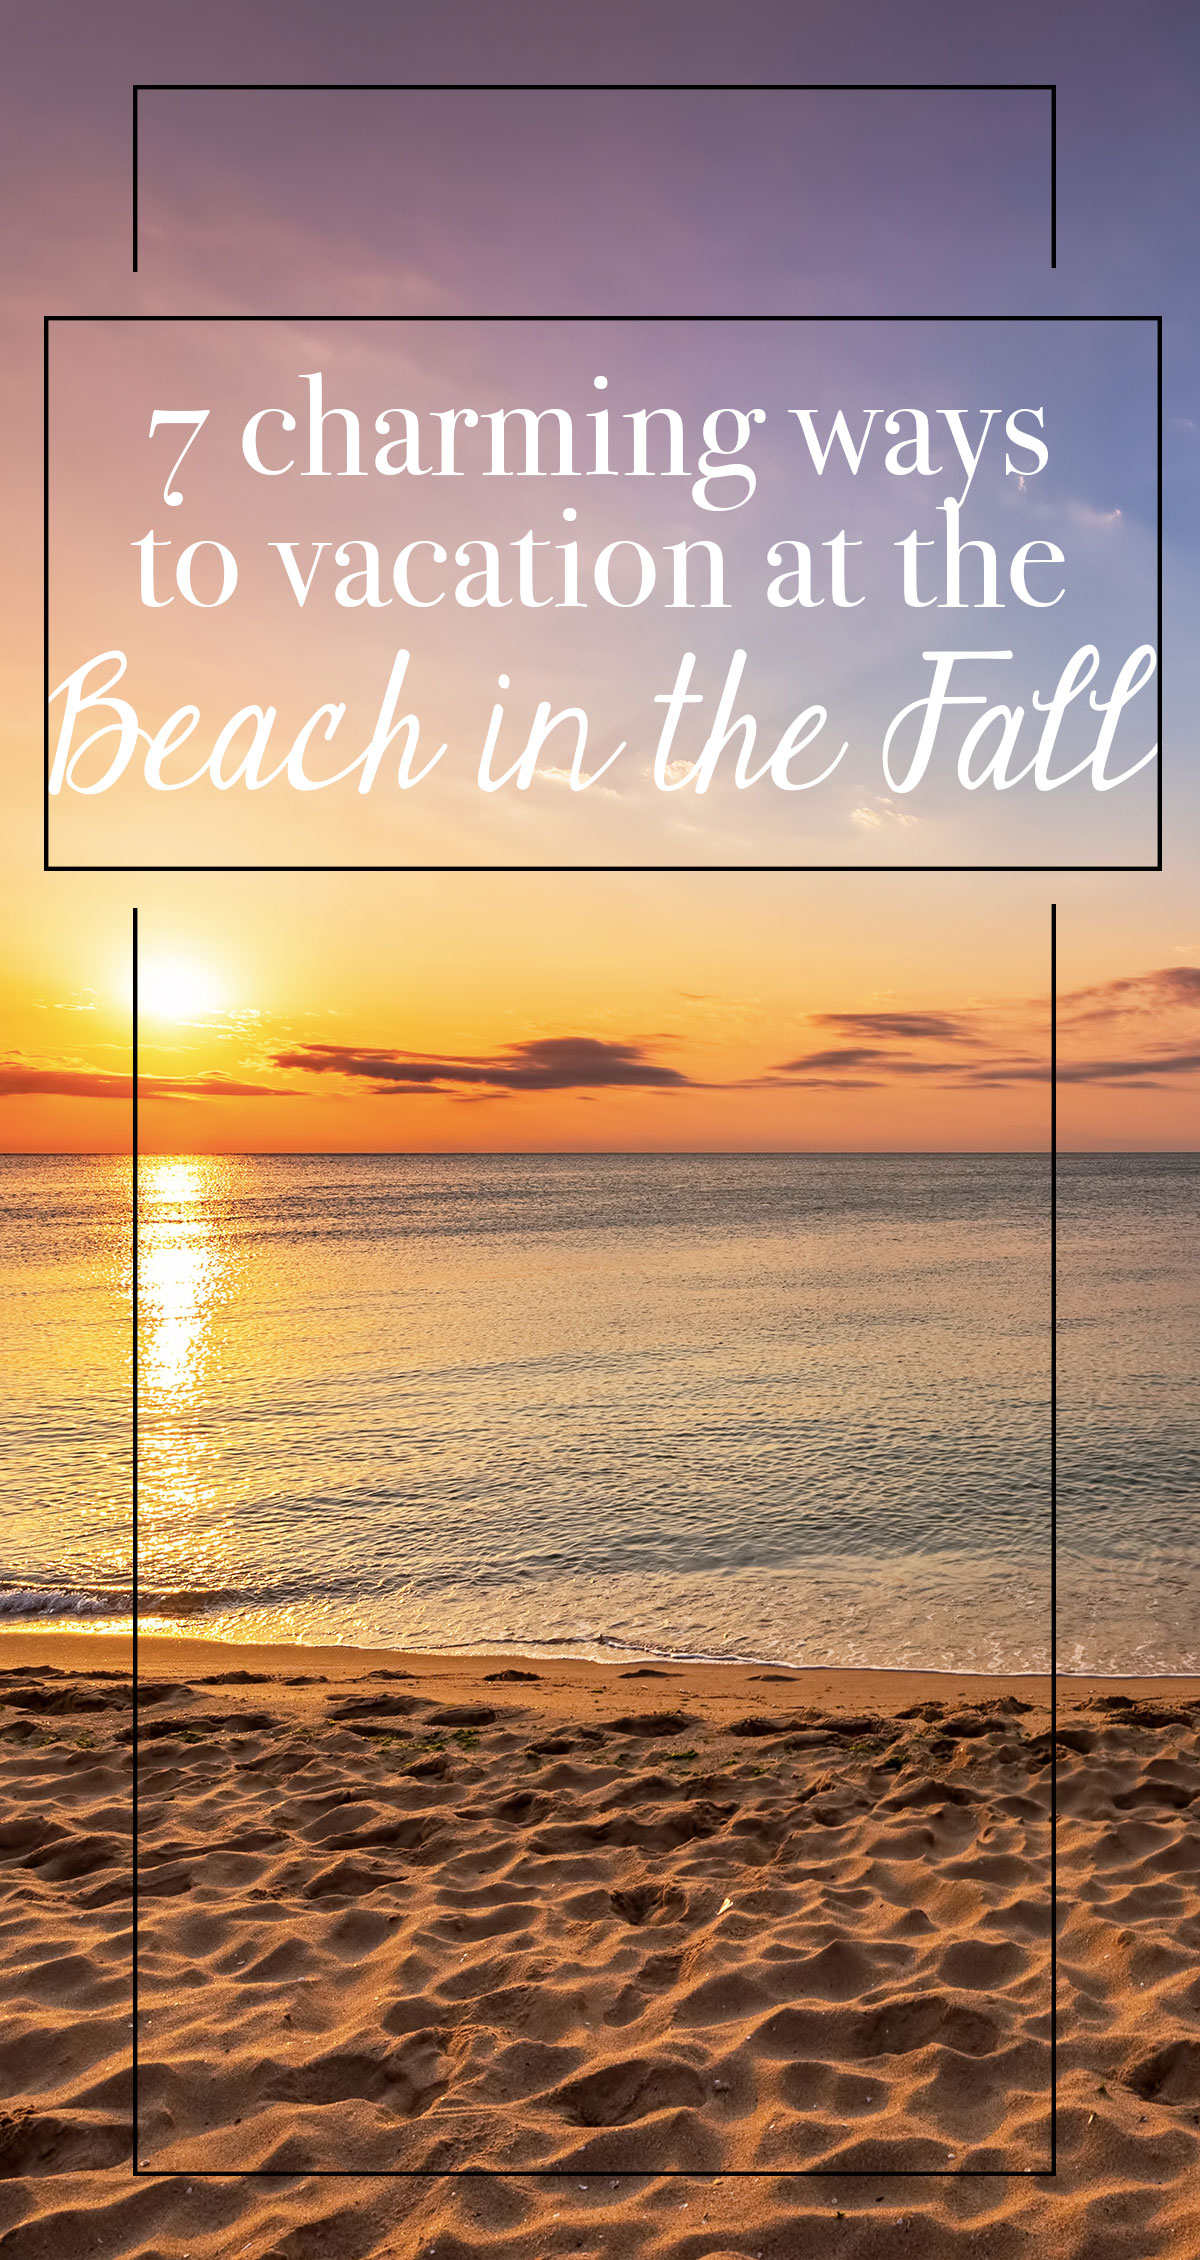 7 Charming Ways to Vacation at the Beach in the Fall Pin